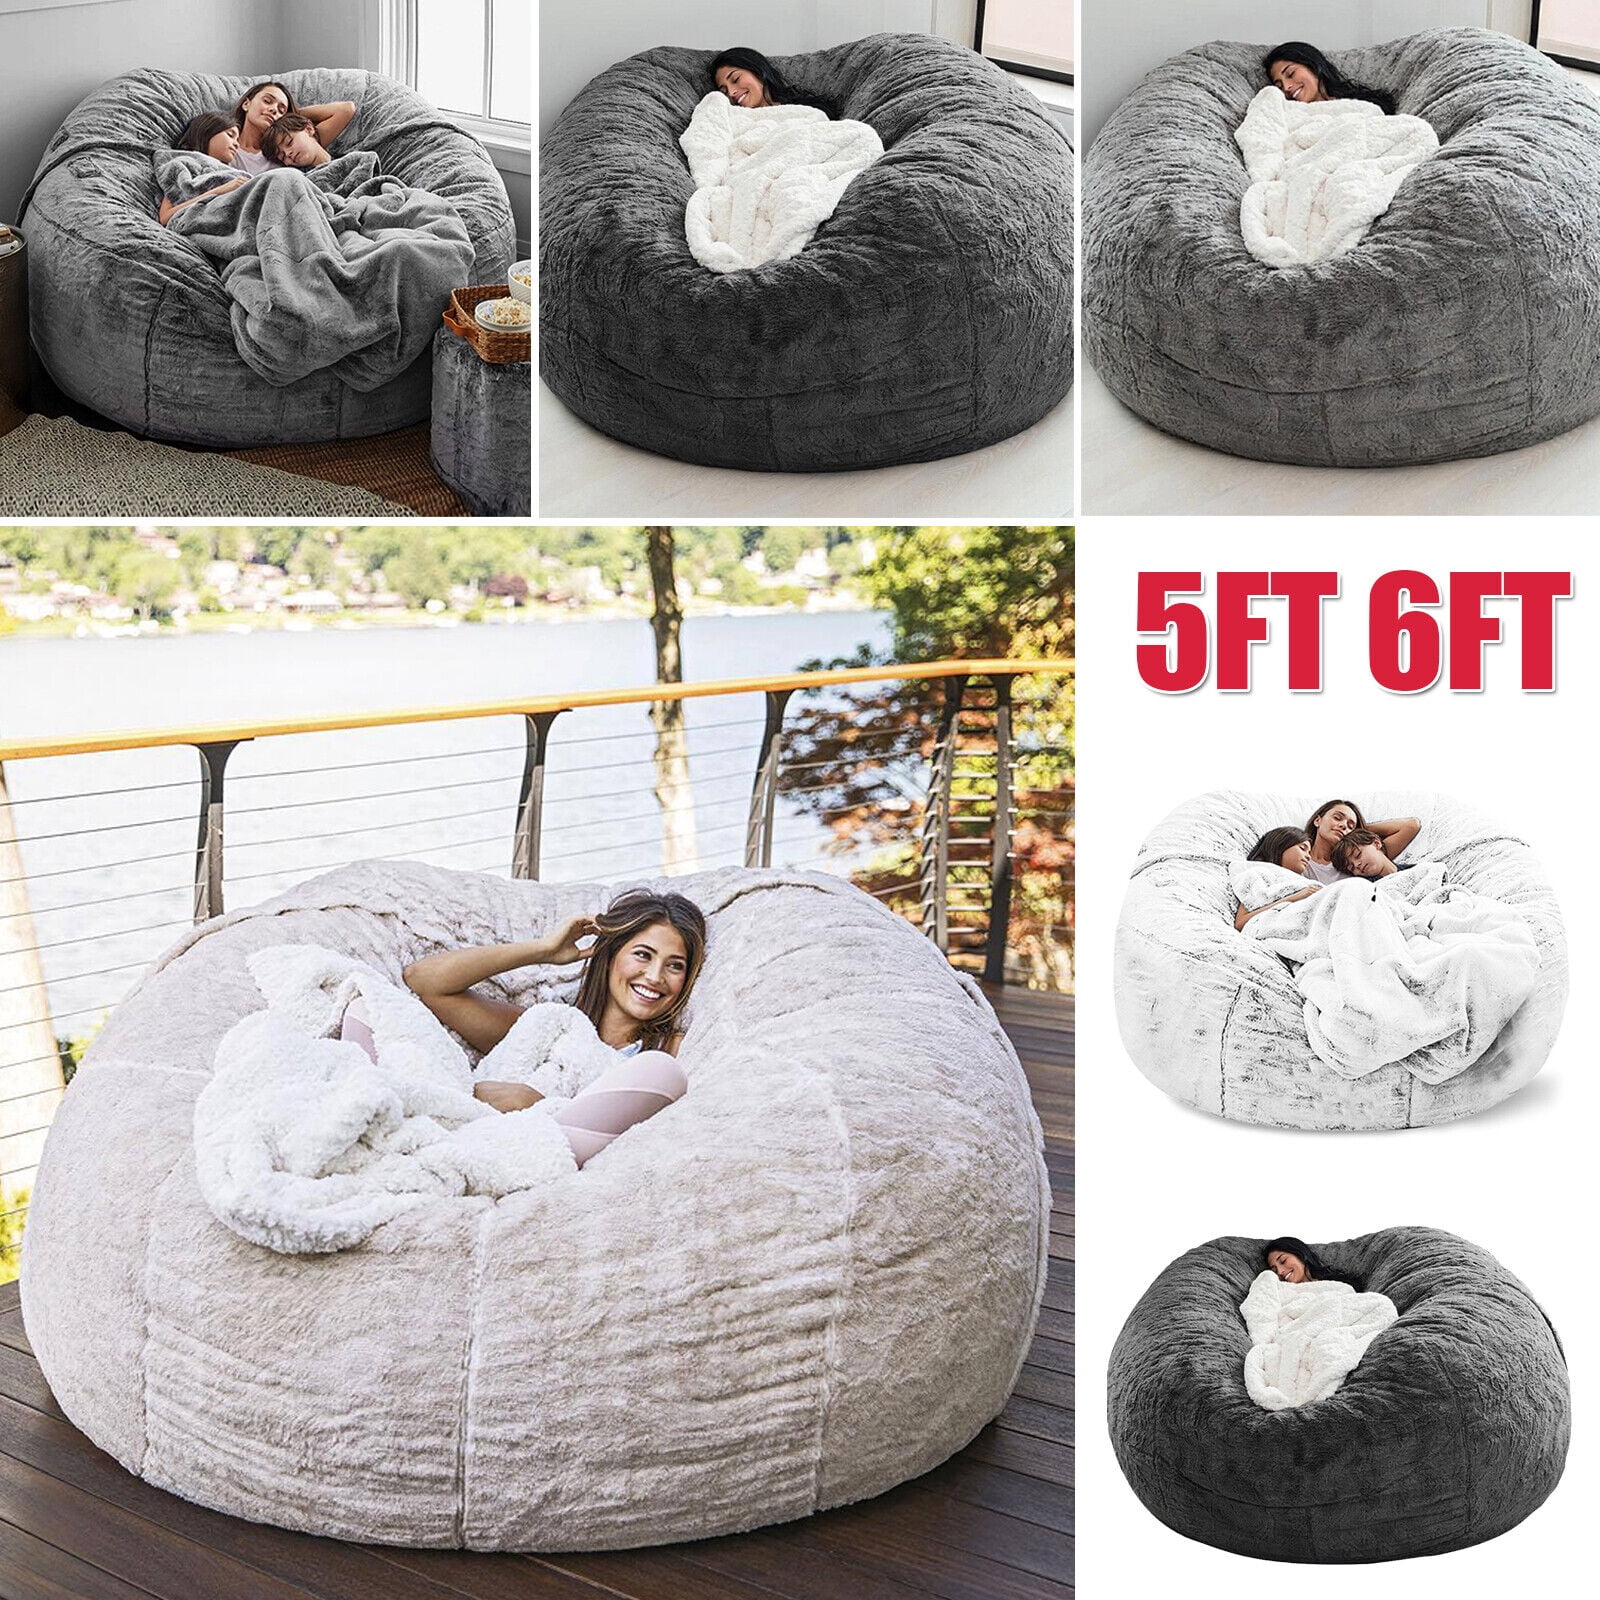 Multifunctional Bean Bag Chair, Large Adult Children's Living Room Furniture,  Soft And Comfortable Bean Bag Cover, Can Relax And Sleep Easy To Clean (NO  Filling) (White, 5FT) 